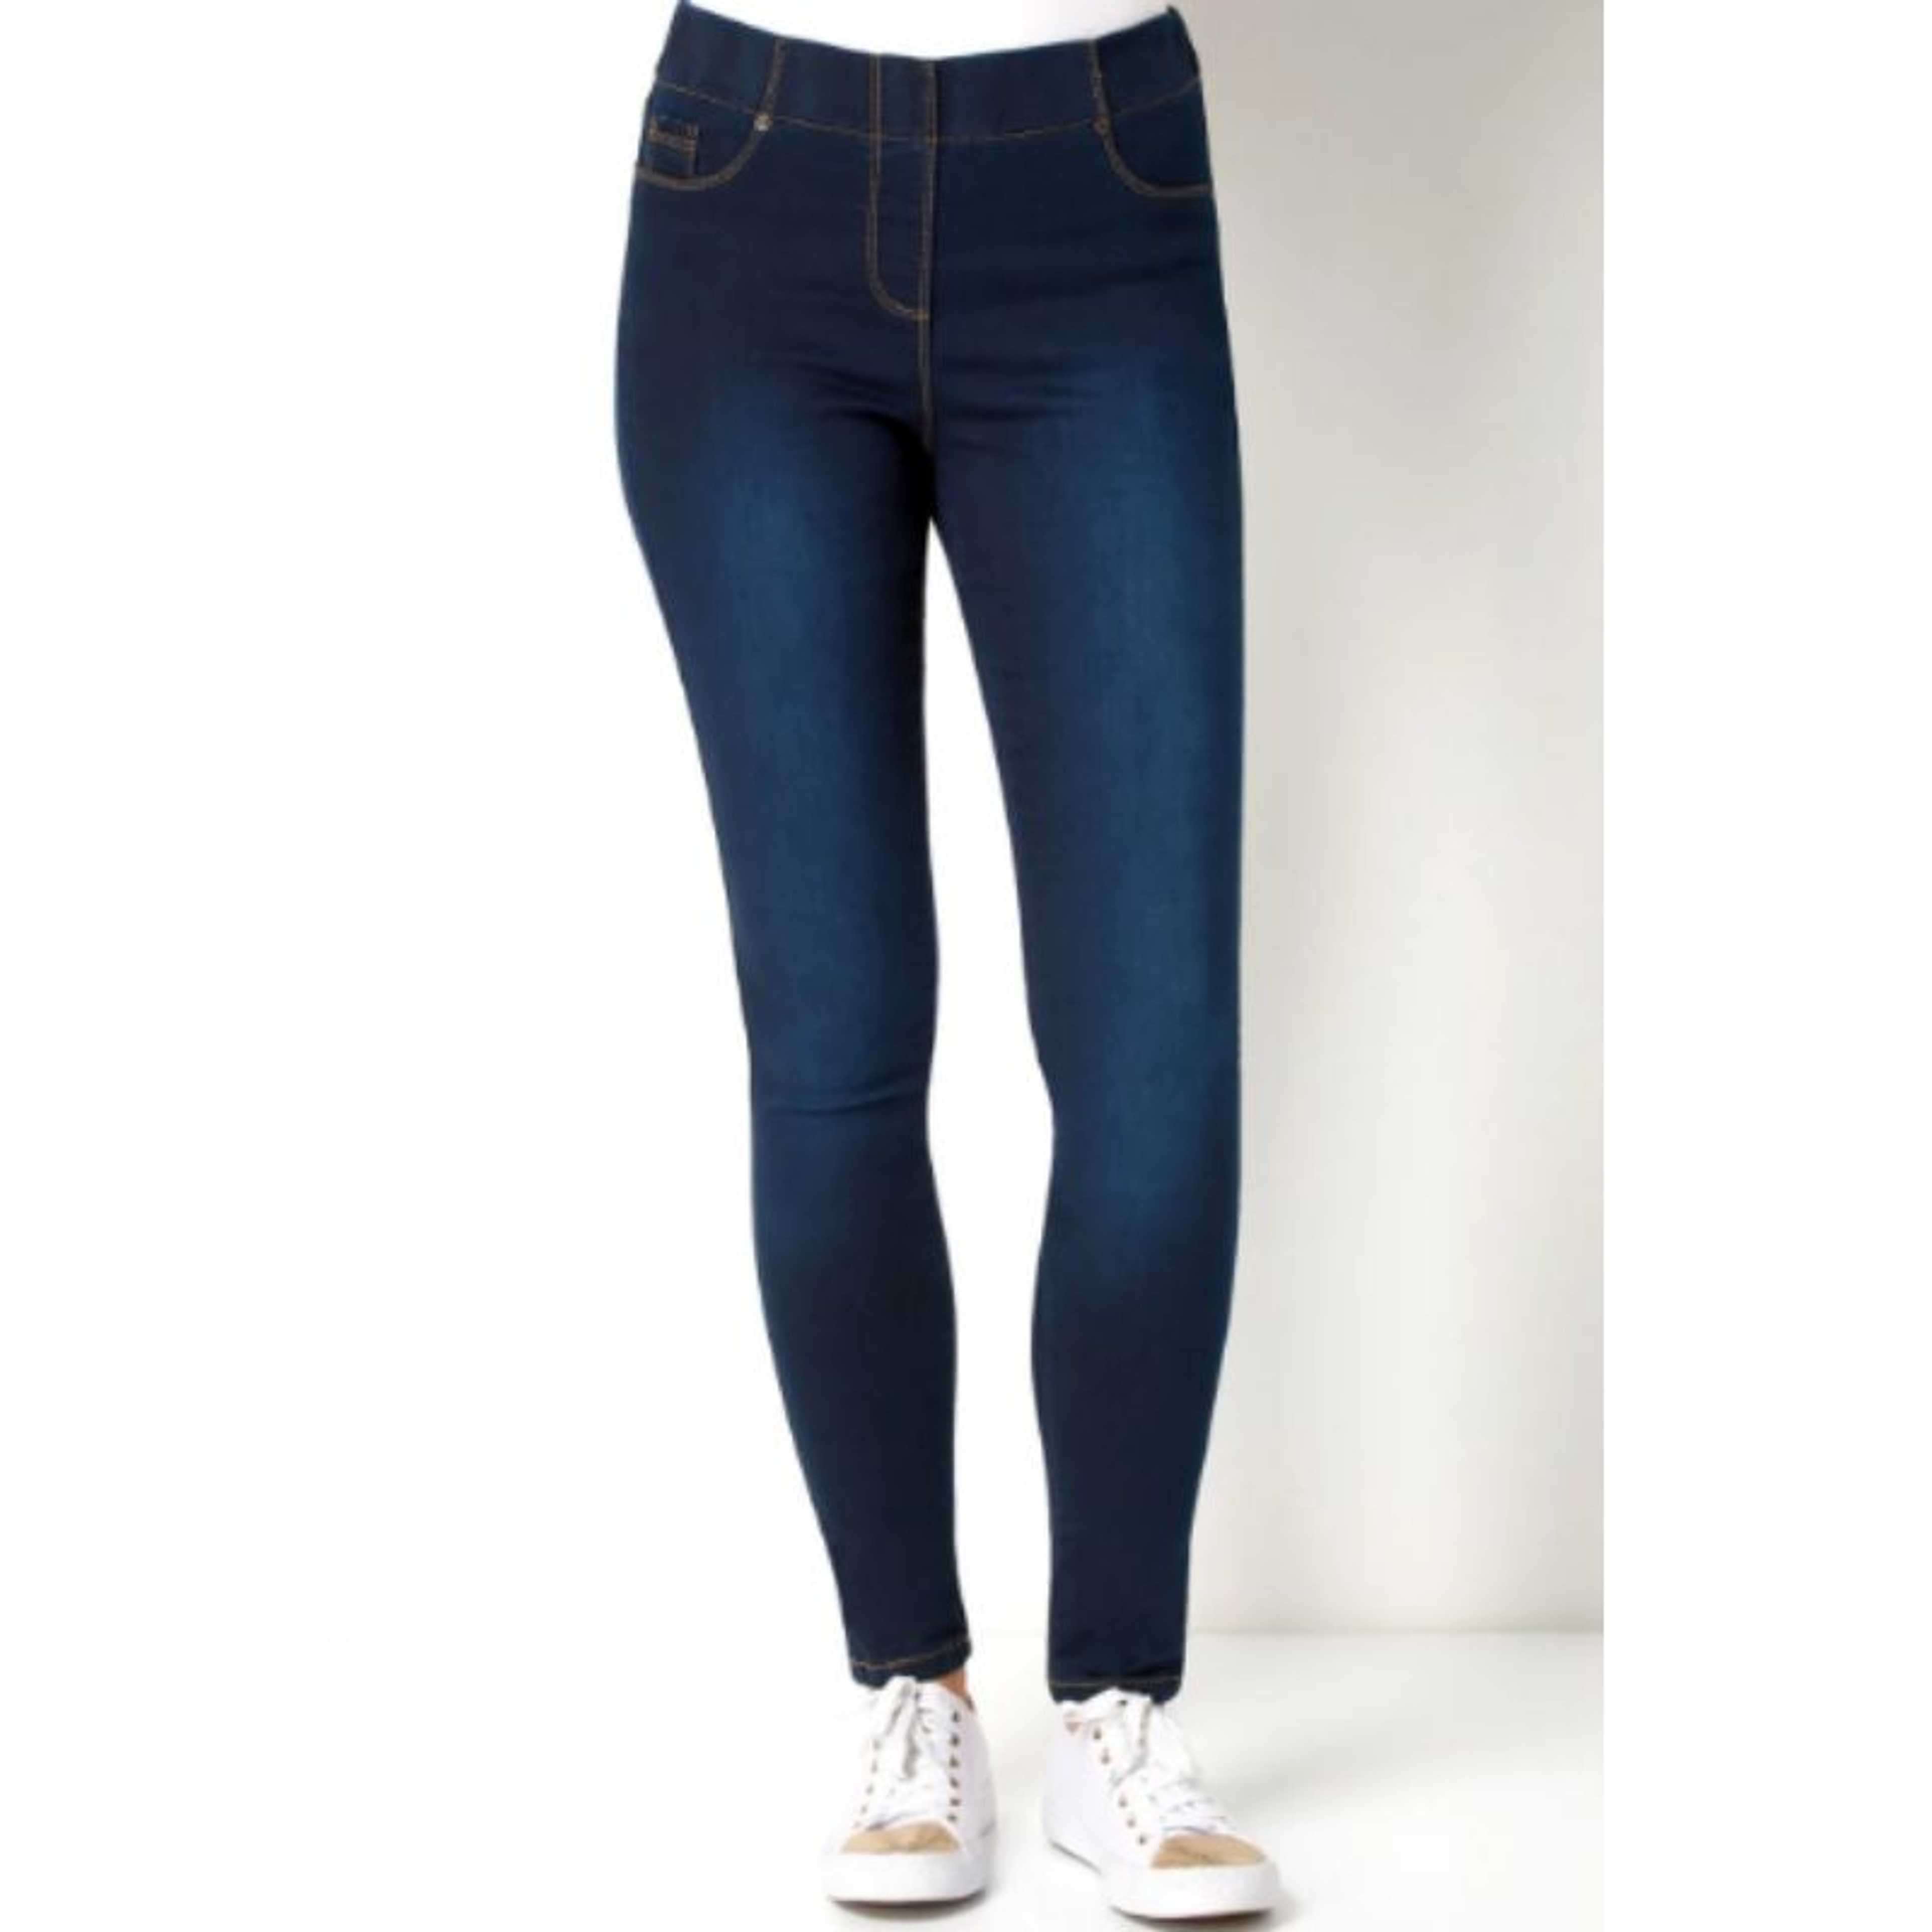 Women's Skinny Stretch Slim Fit Jeggings with Back Pockets